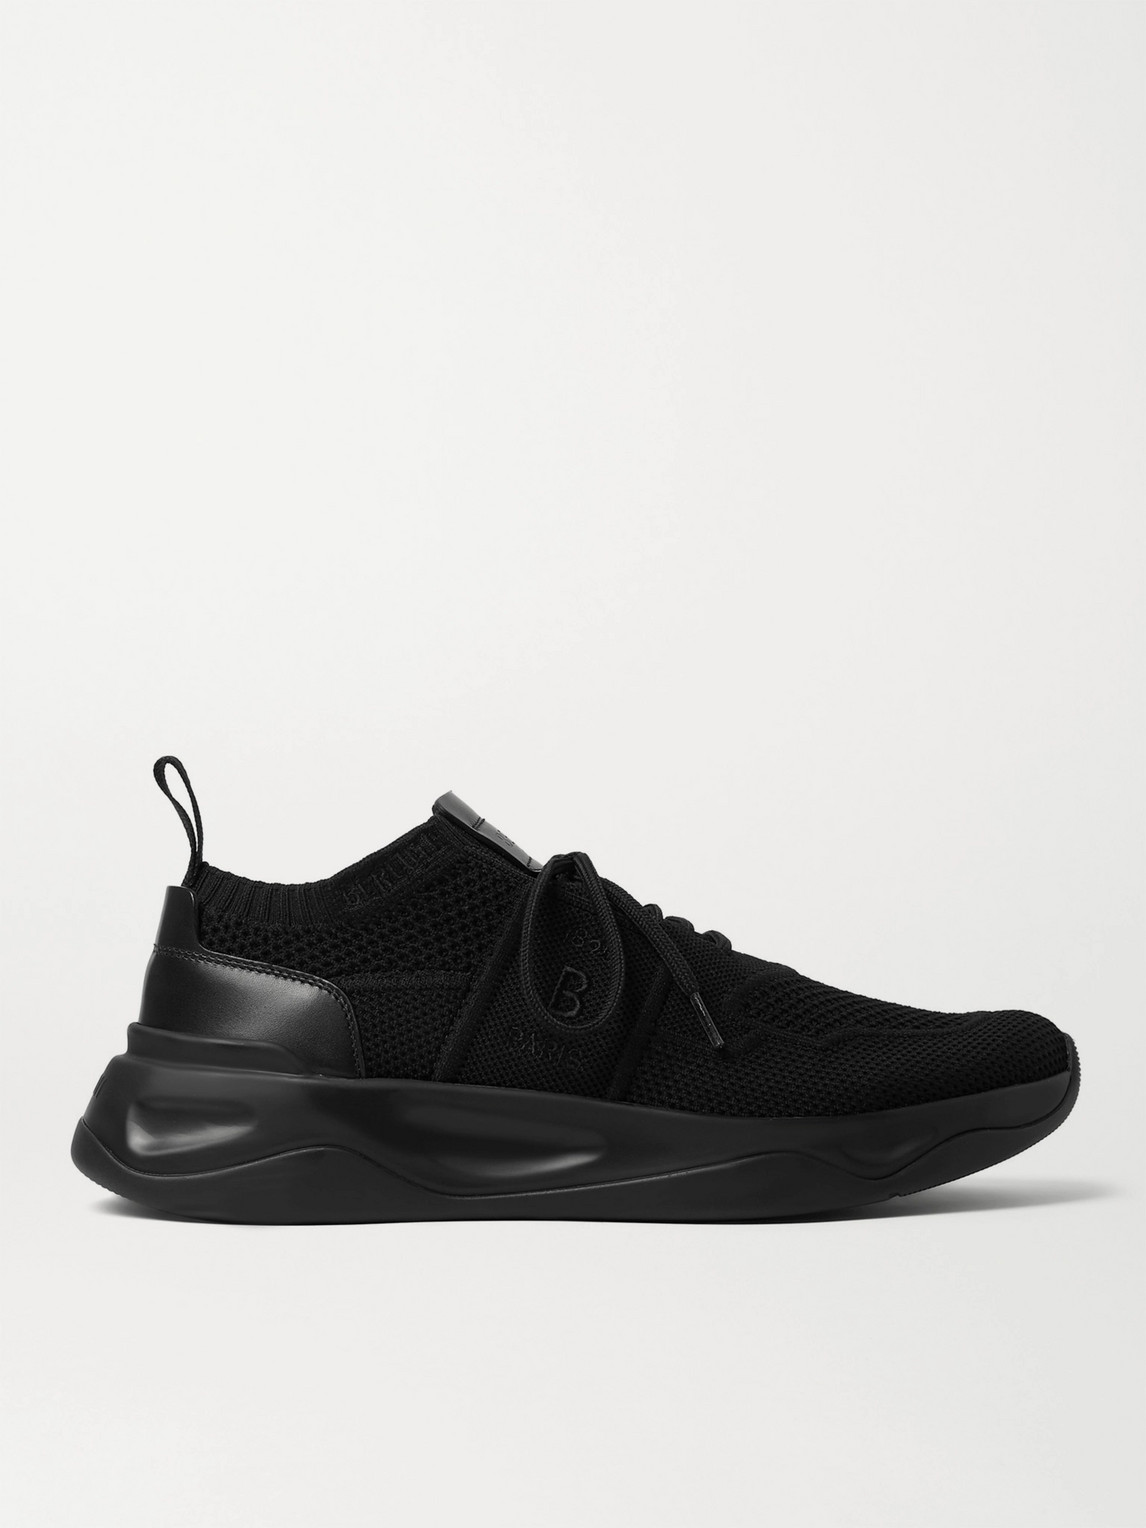 BERLUTI SHADOW LEATHER-TRIMMED STRETCH-KNIT SNEAKERS